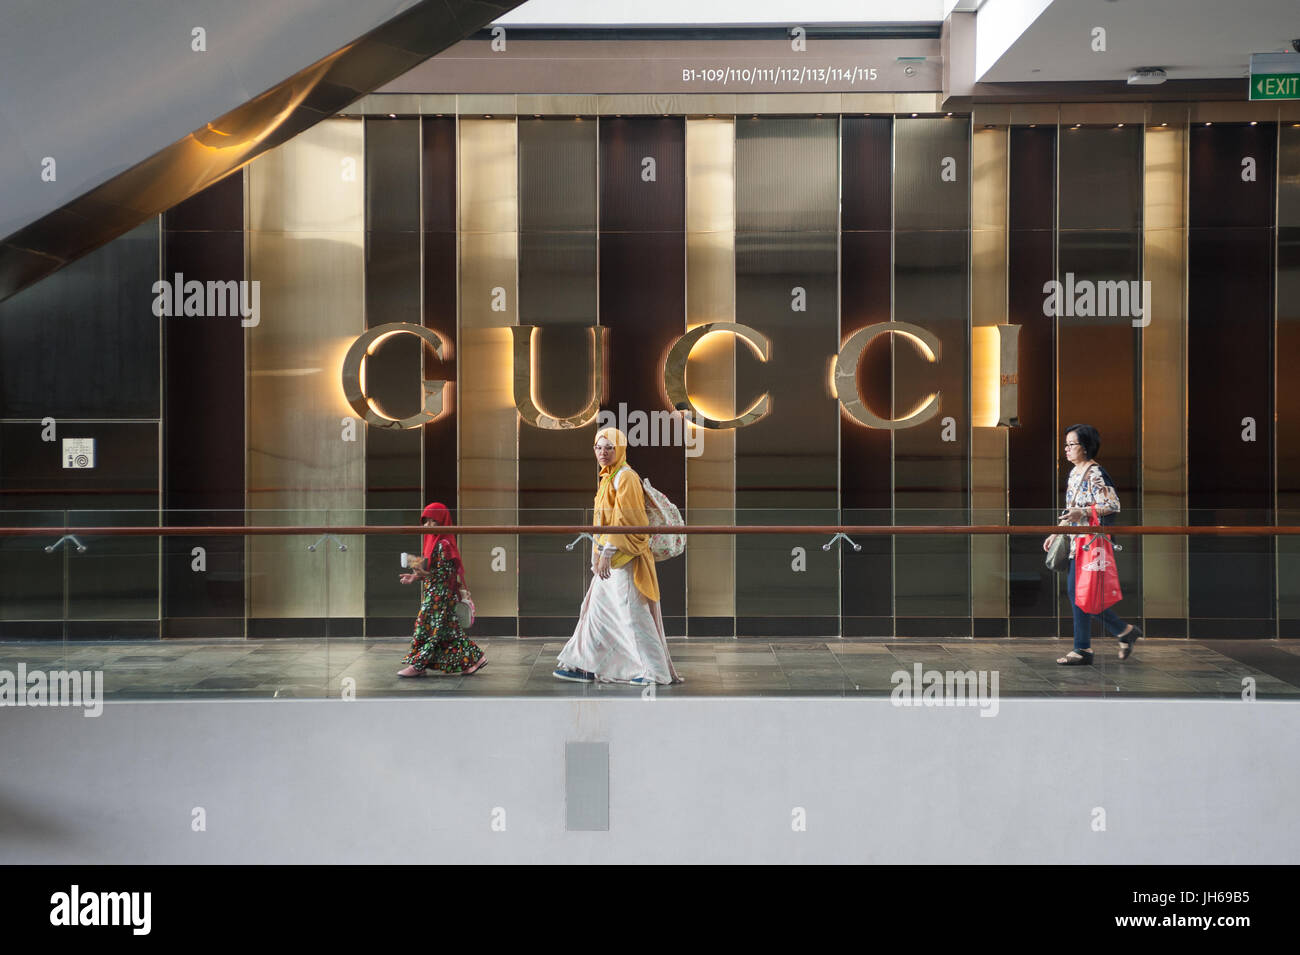 25.05.2017, Singapore, Republic of Singapore, Asia - A woman and her daughter walk by a retail shop of the luxury brand Gucci in 'The Shoppes' mall. Stock Photo